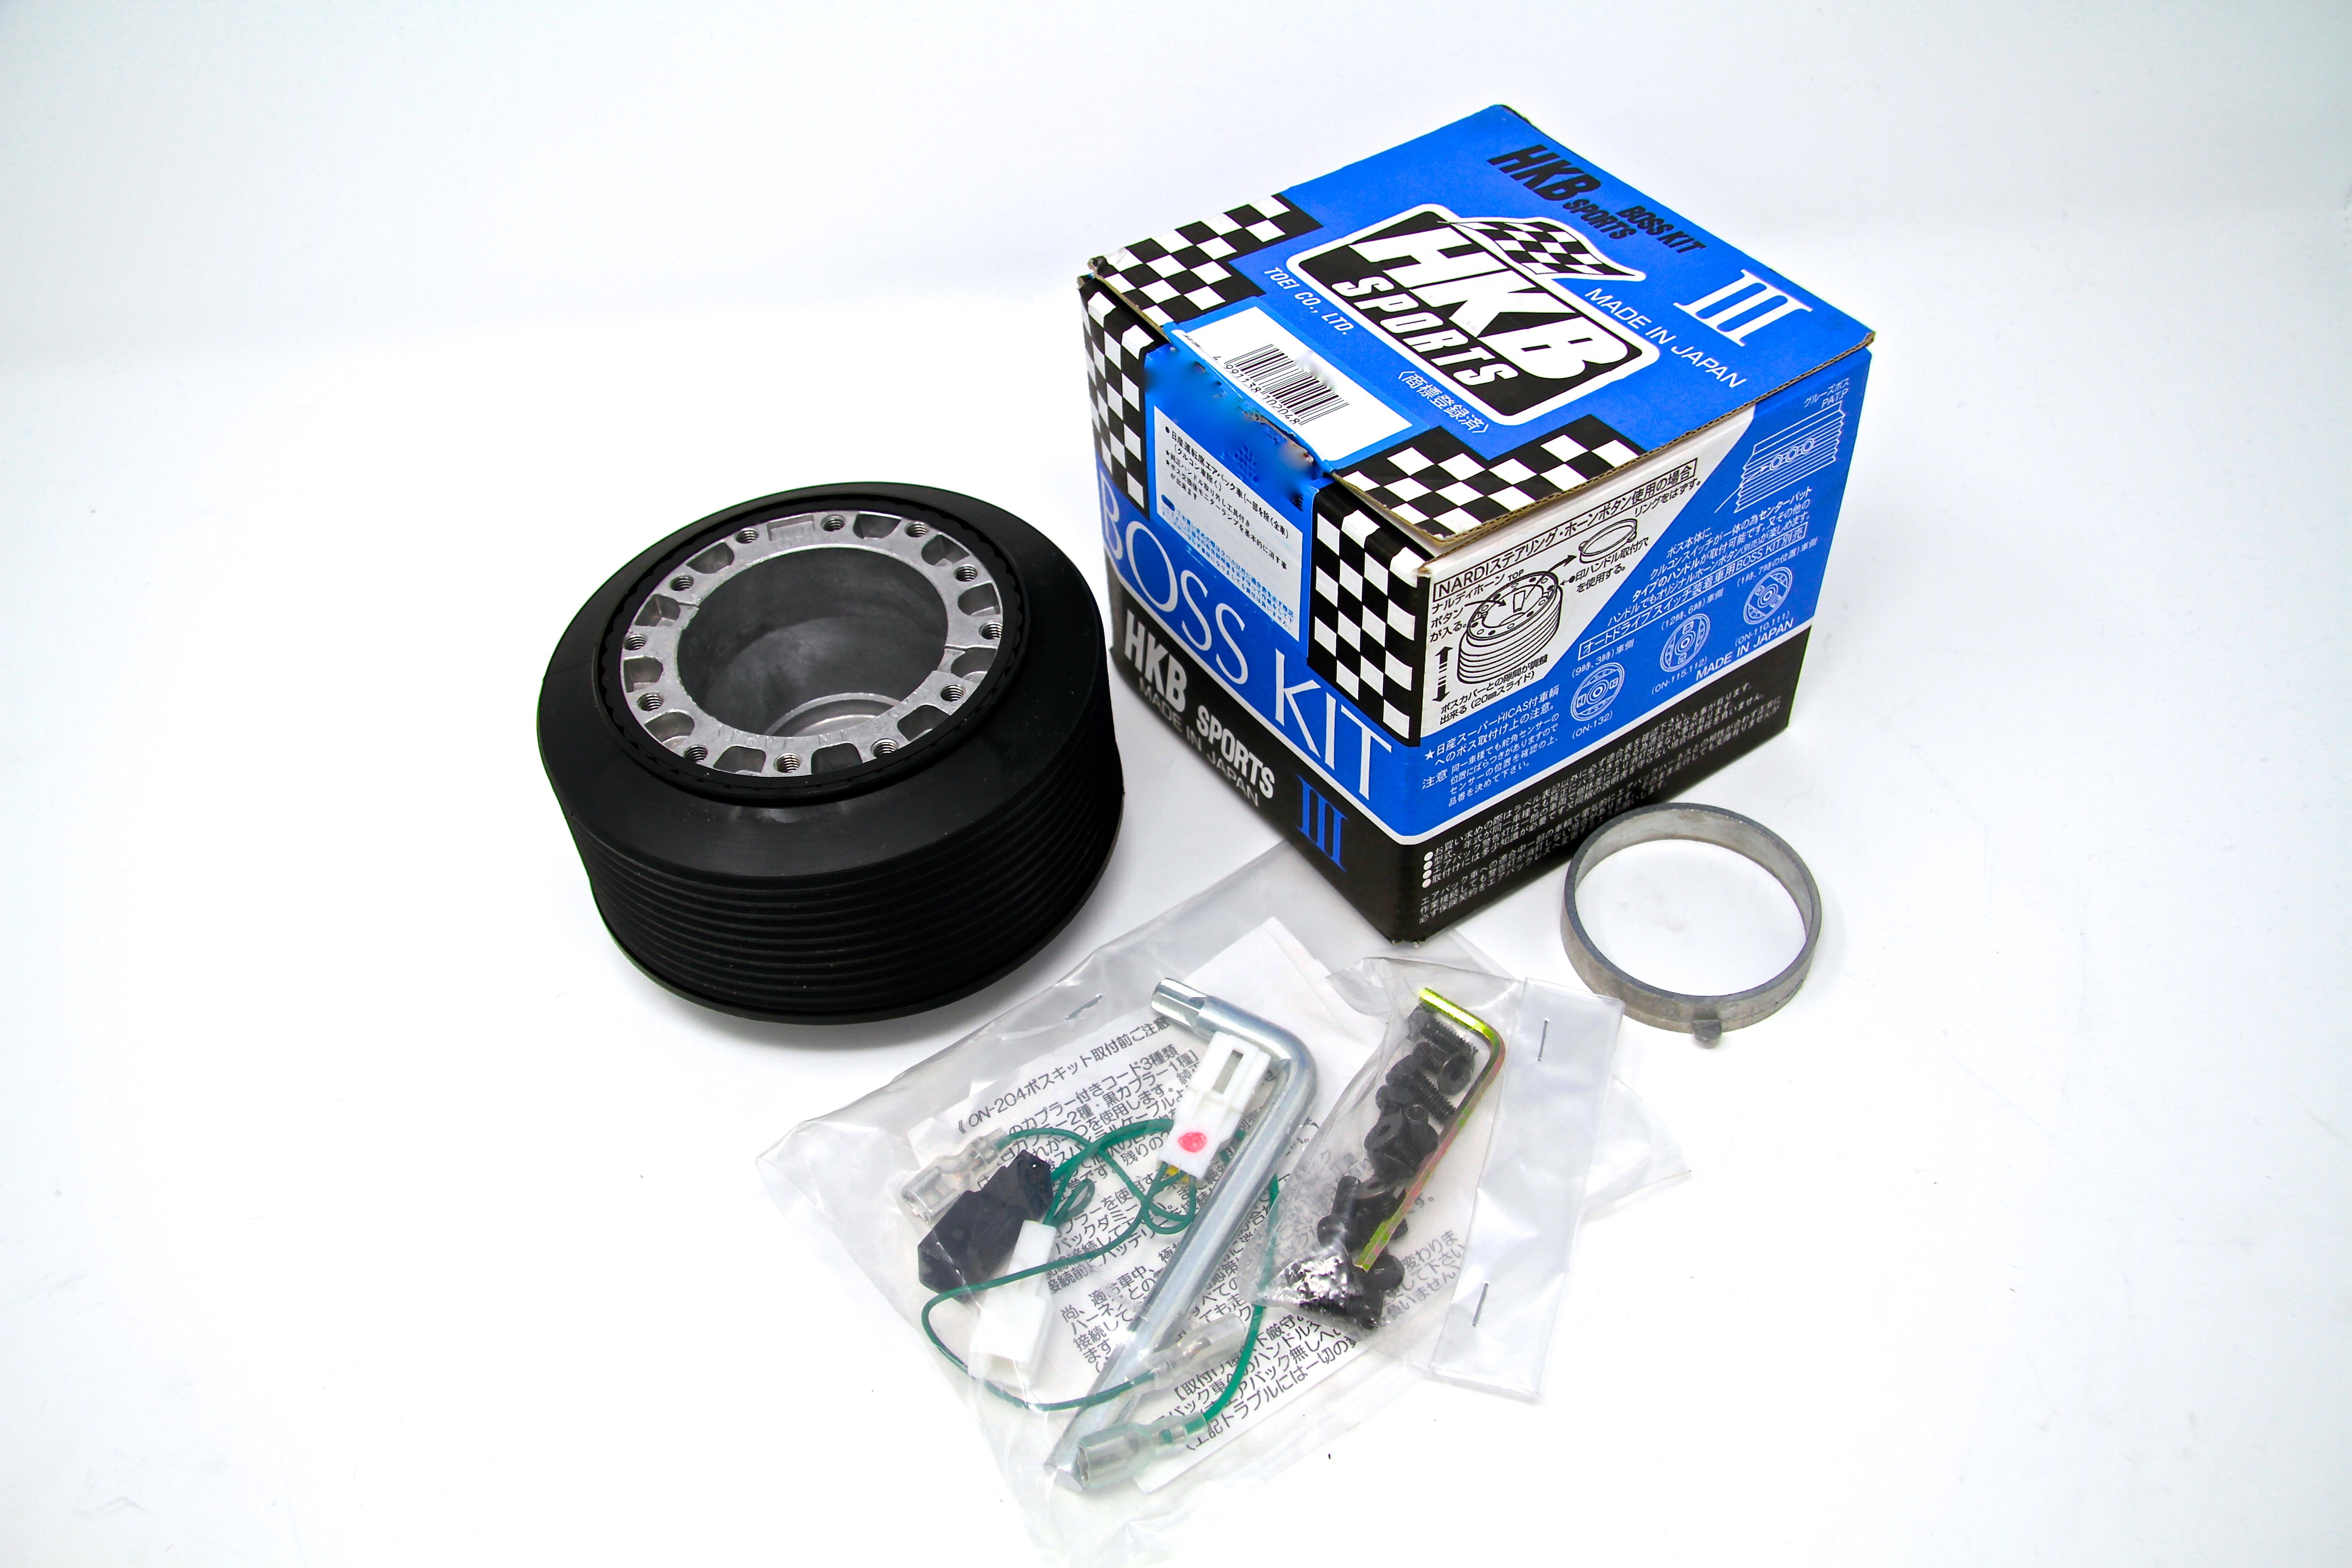 HKB steering boss including hardware for mounting. Available for most Japanese Cars.